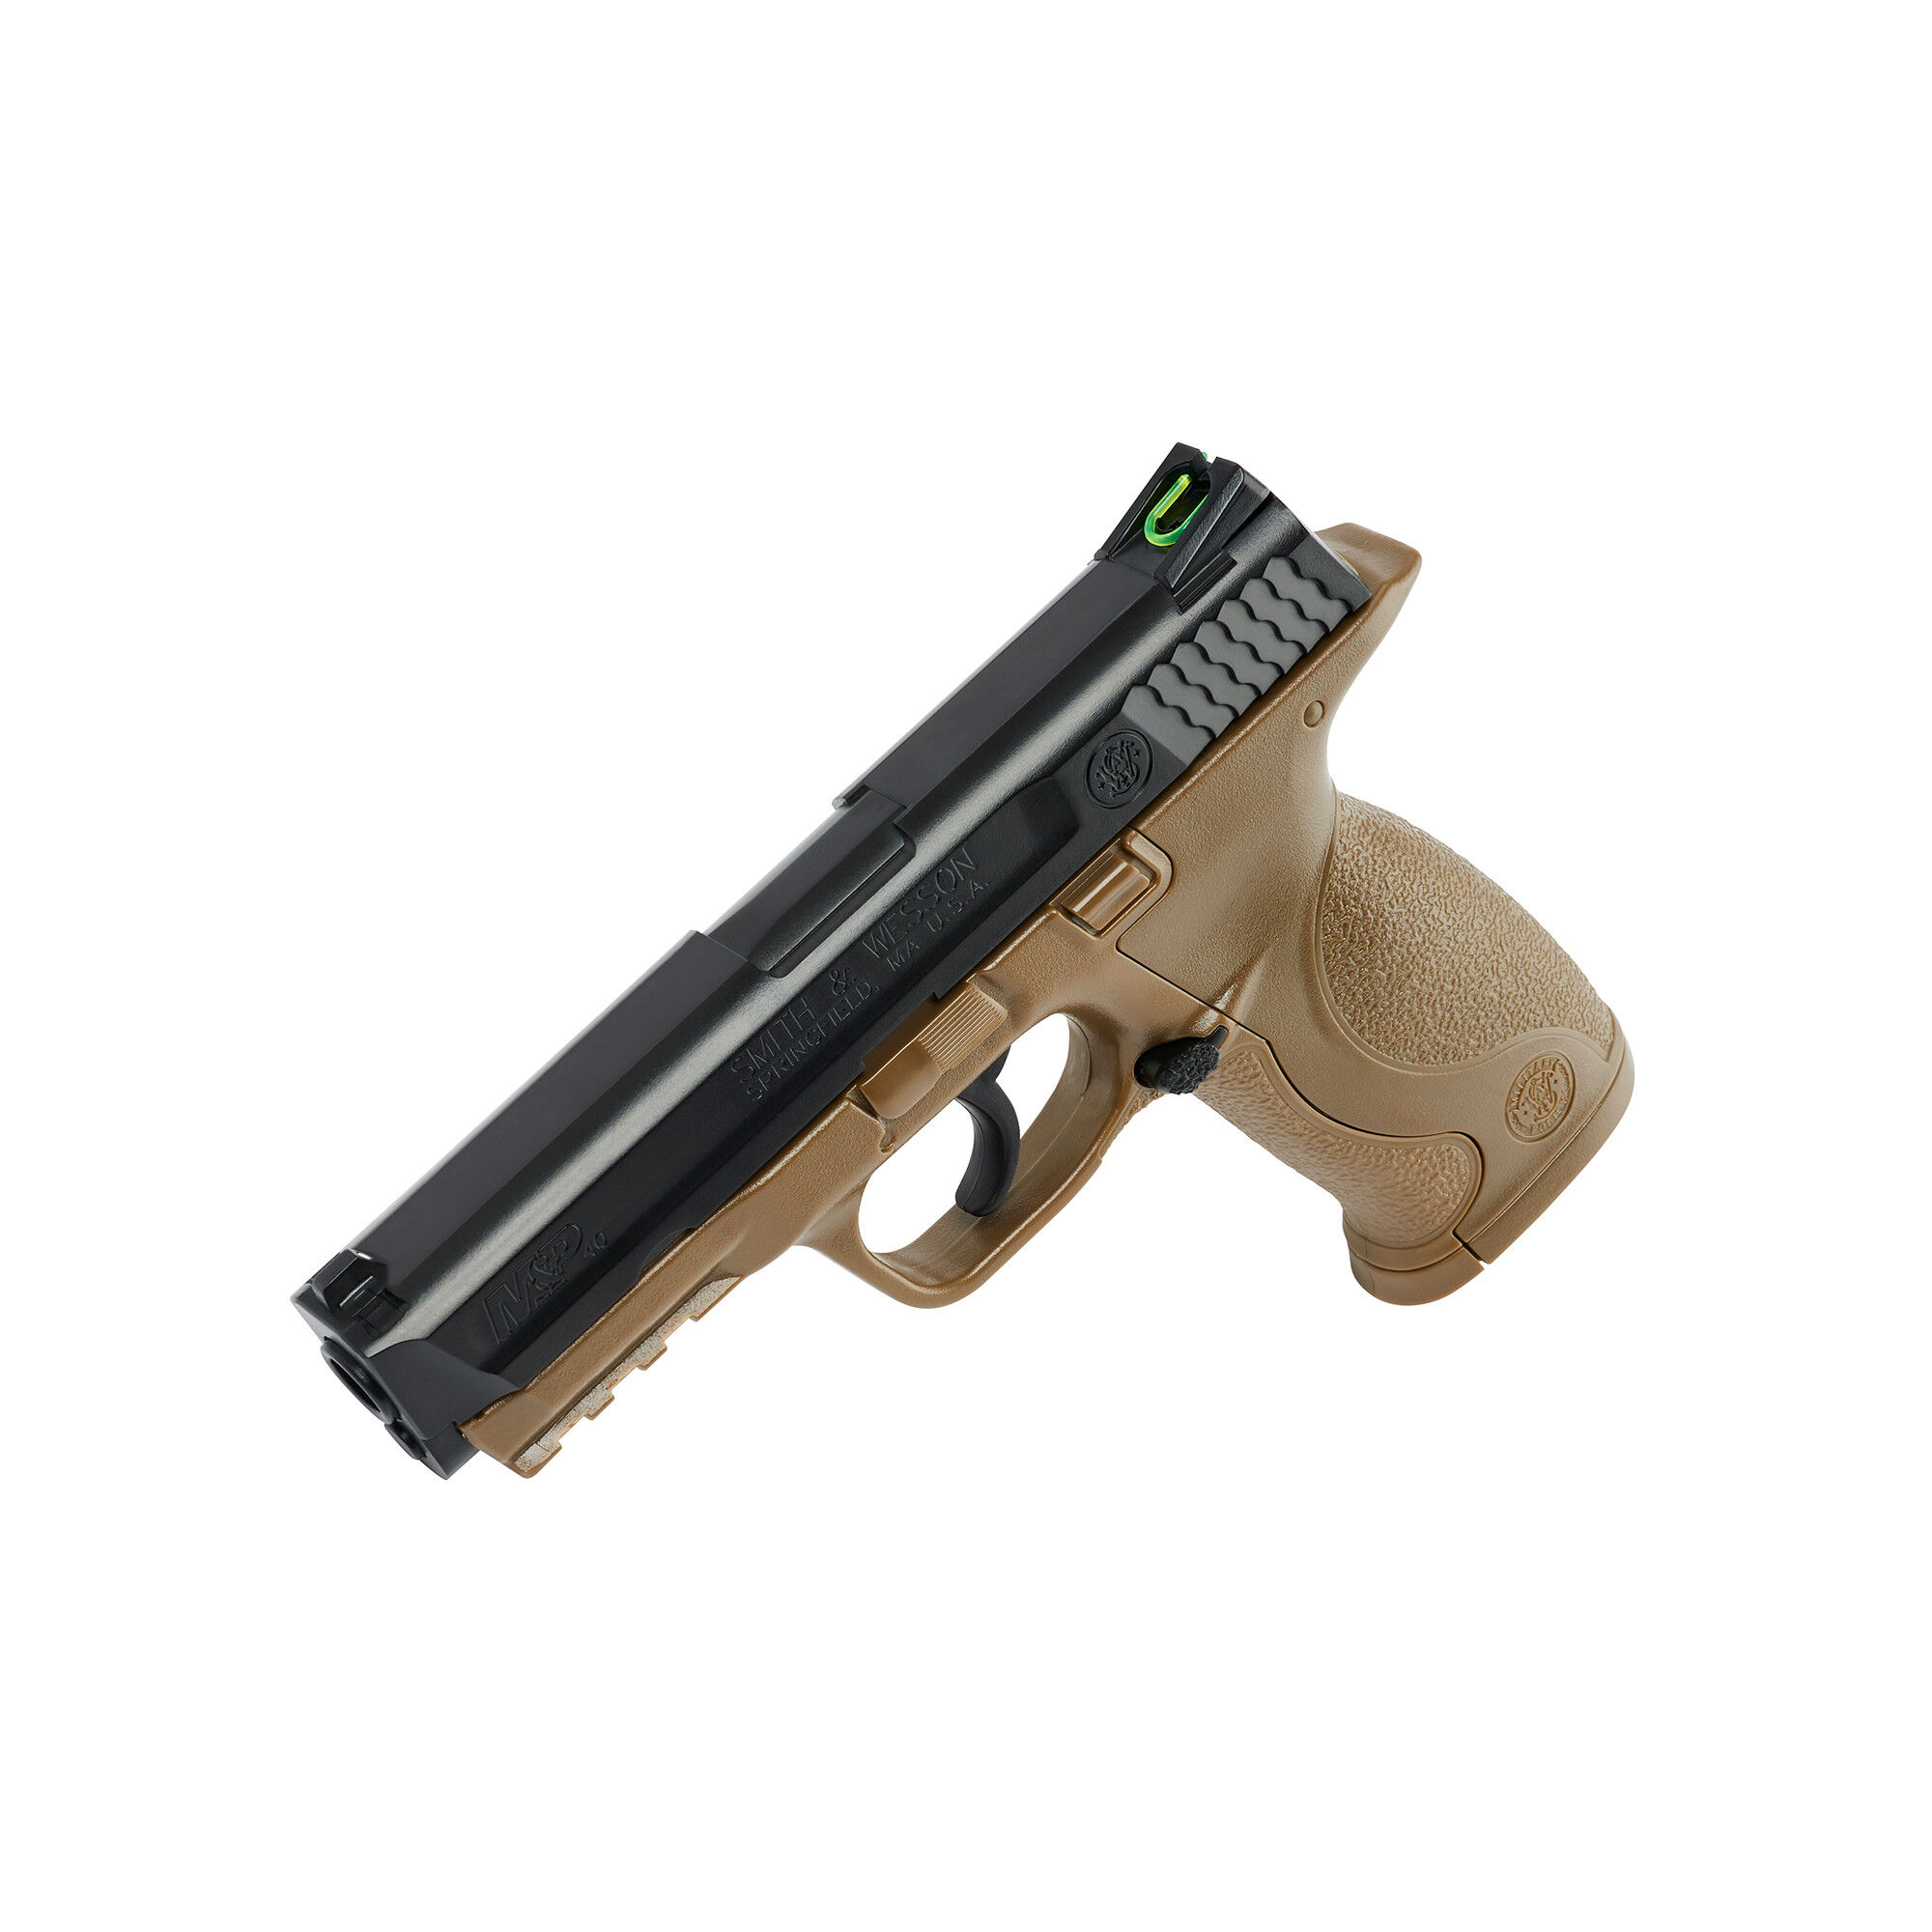 Academy Science S/W M&P 40 Full Size Airsoft Pistol BB Replica Hand Toy Gun 